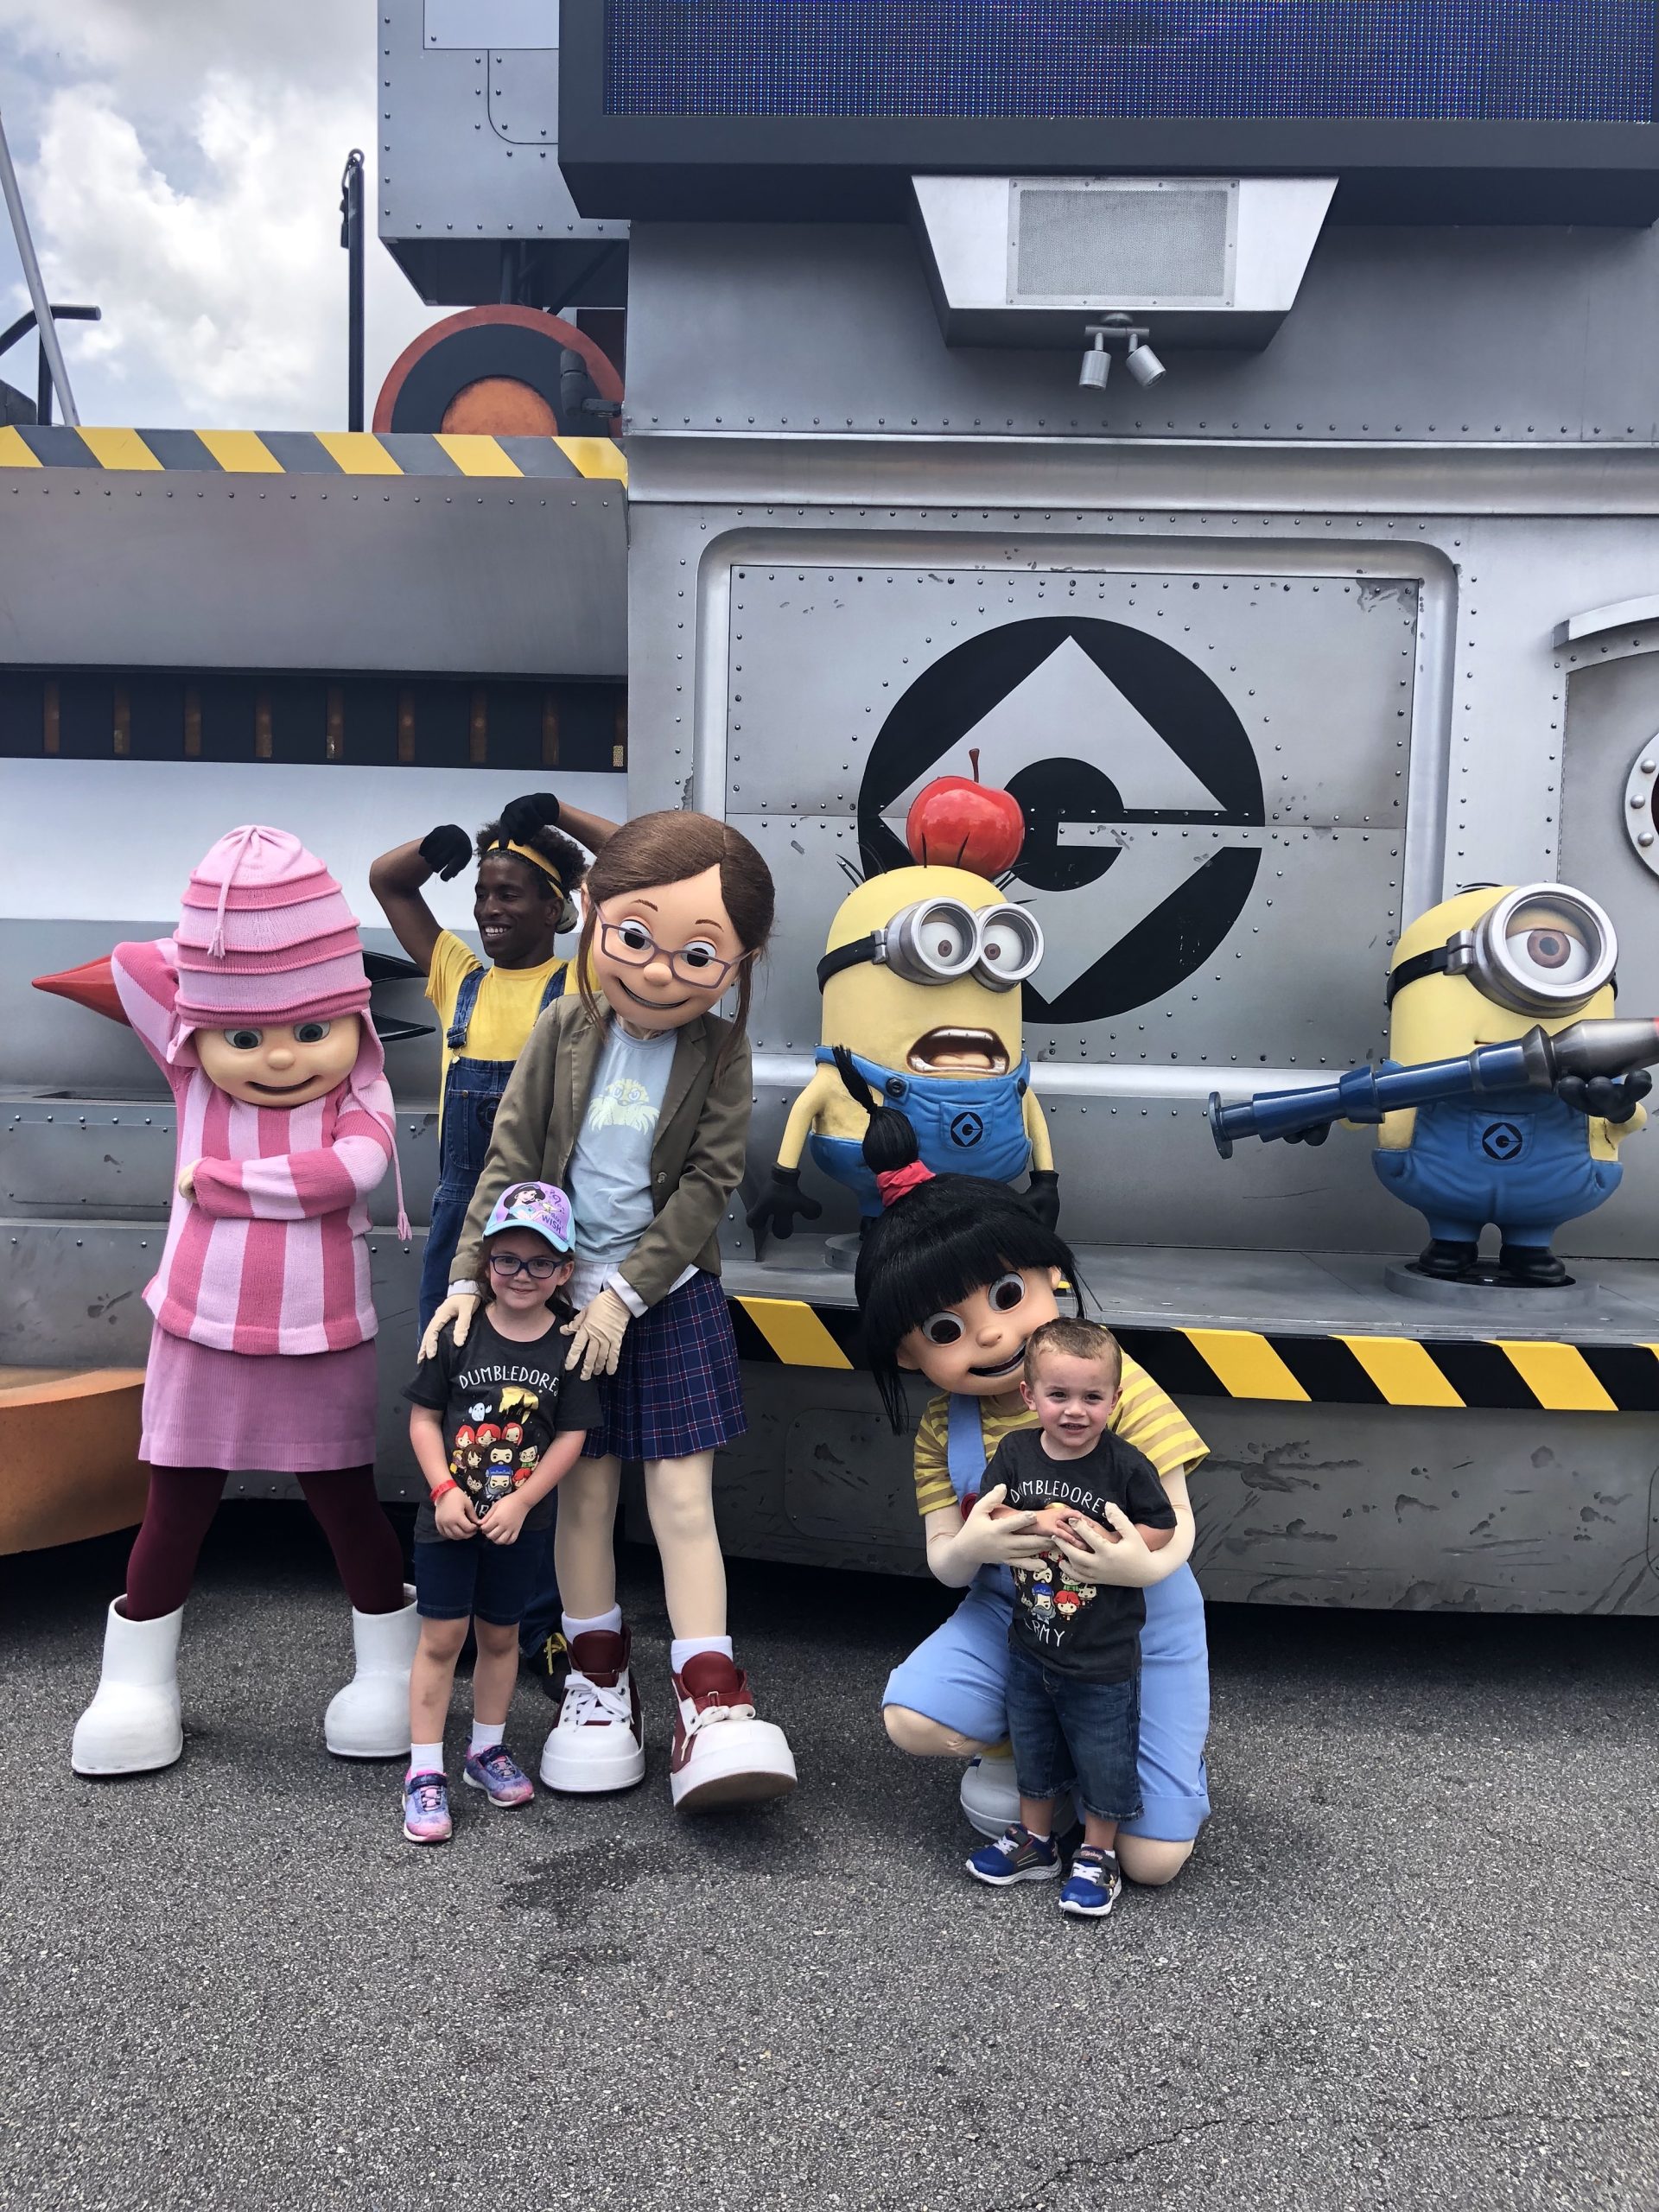 Visiting the Minions!